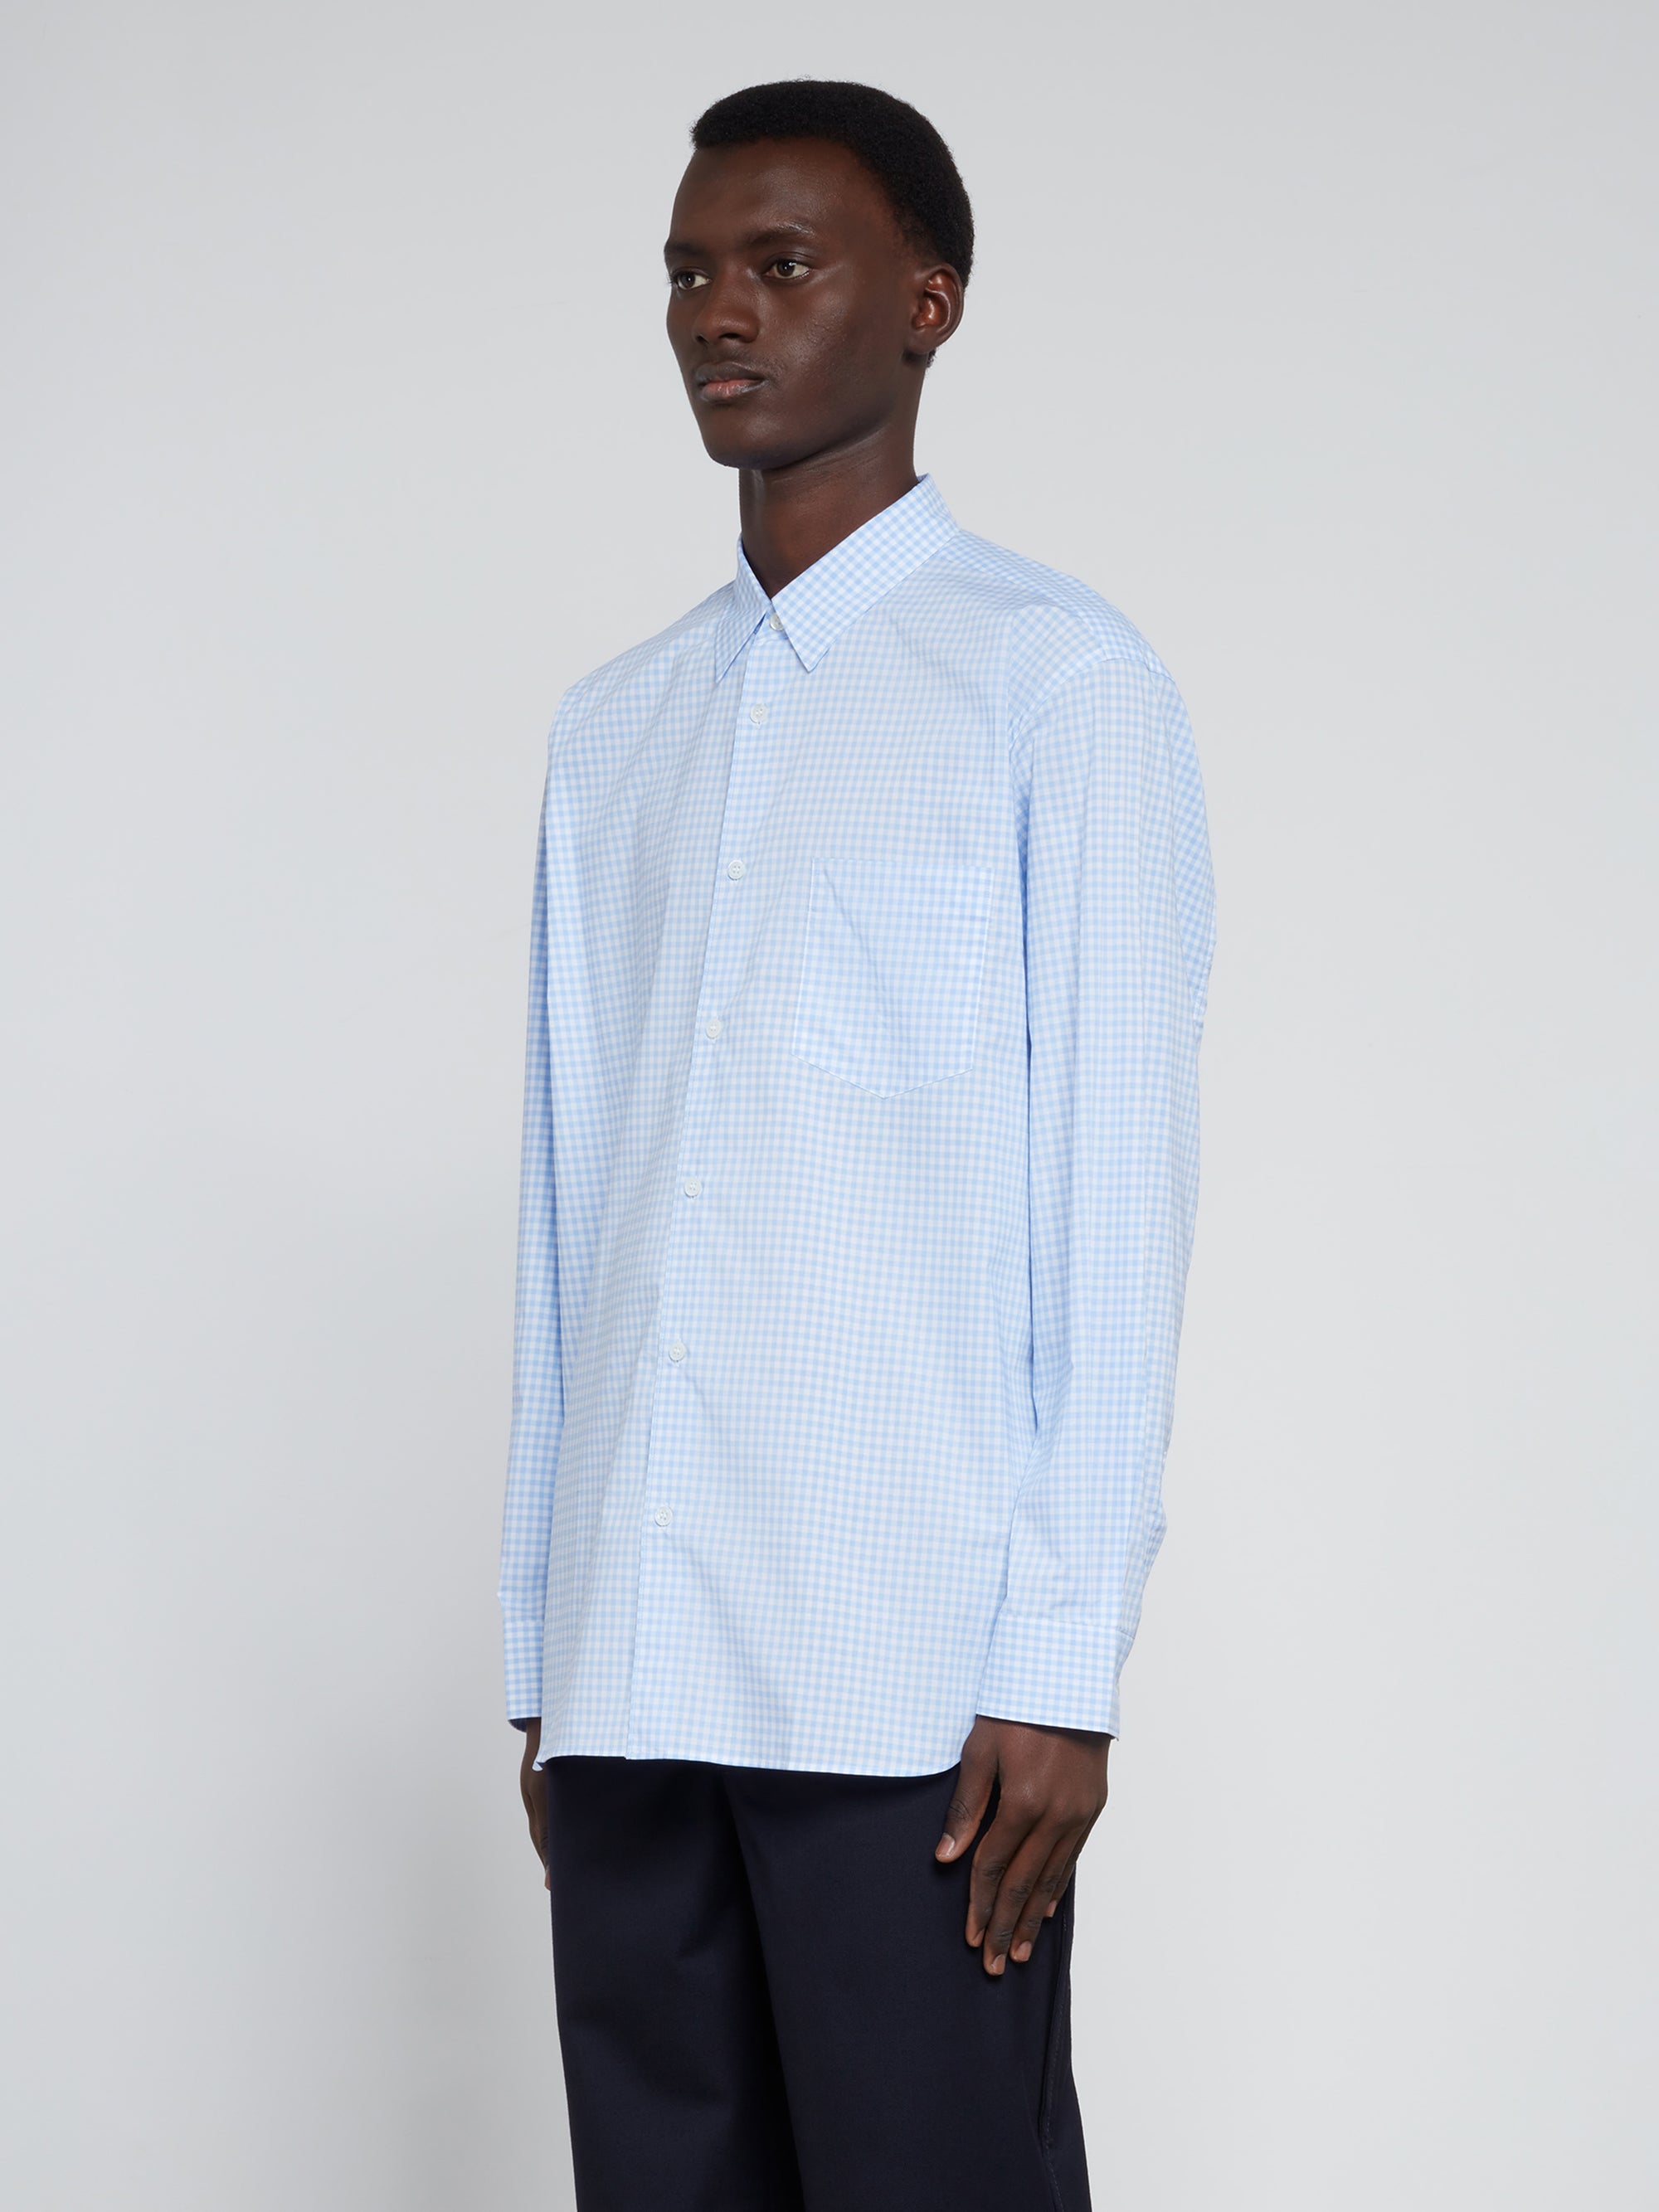 CDG Shirt Forever - Wide Fit Small Check Woven Cotton Shirt - (Blue) view 3